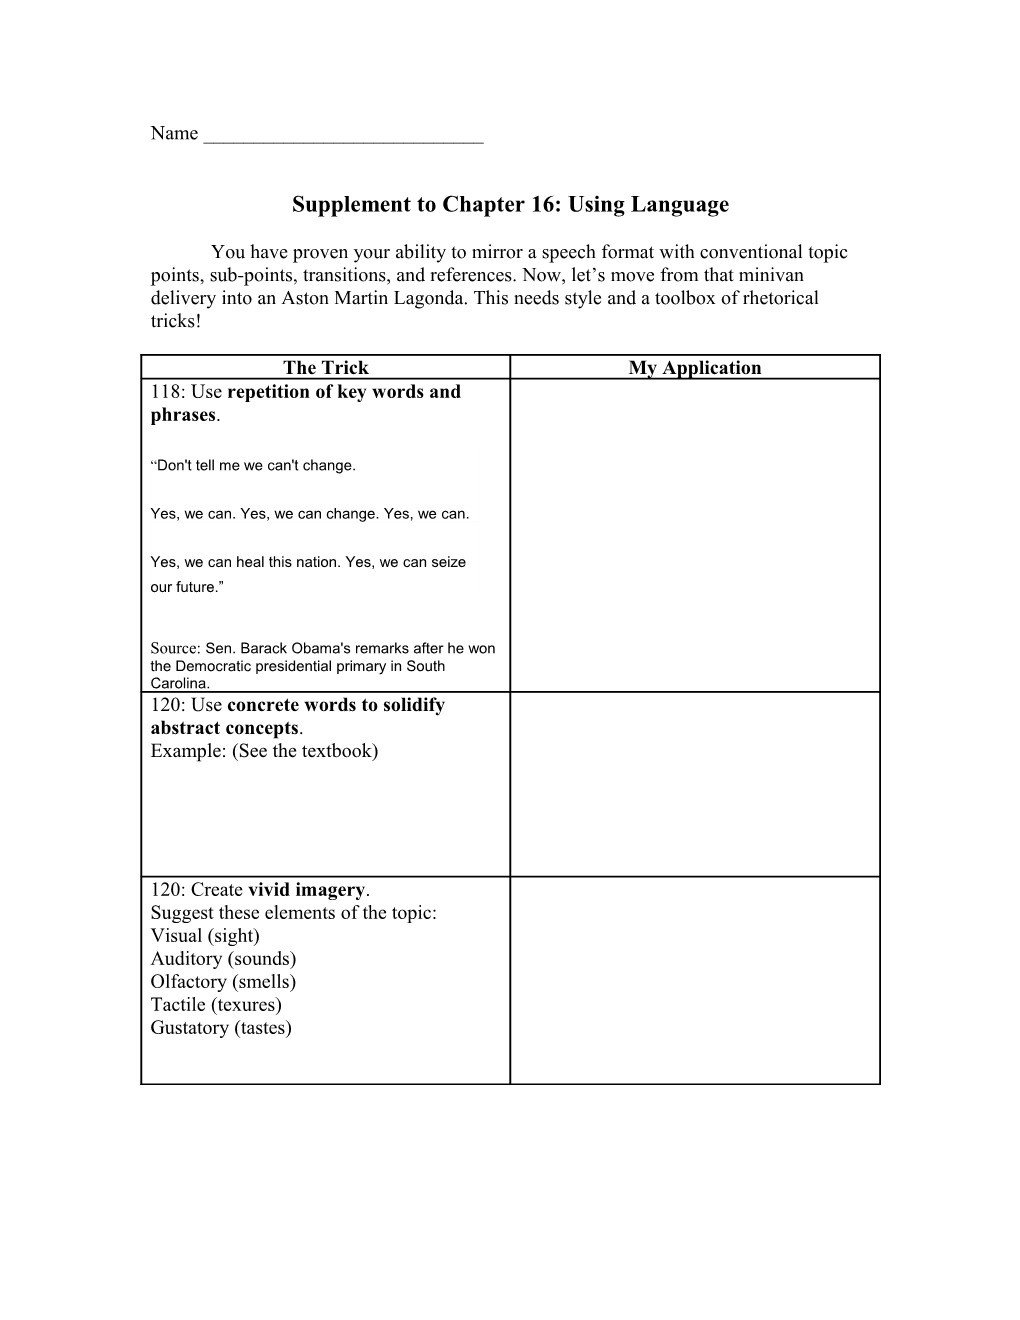 Supplement to Chapter 16: Using Language